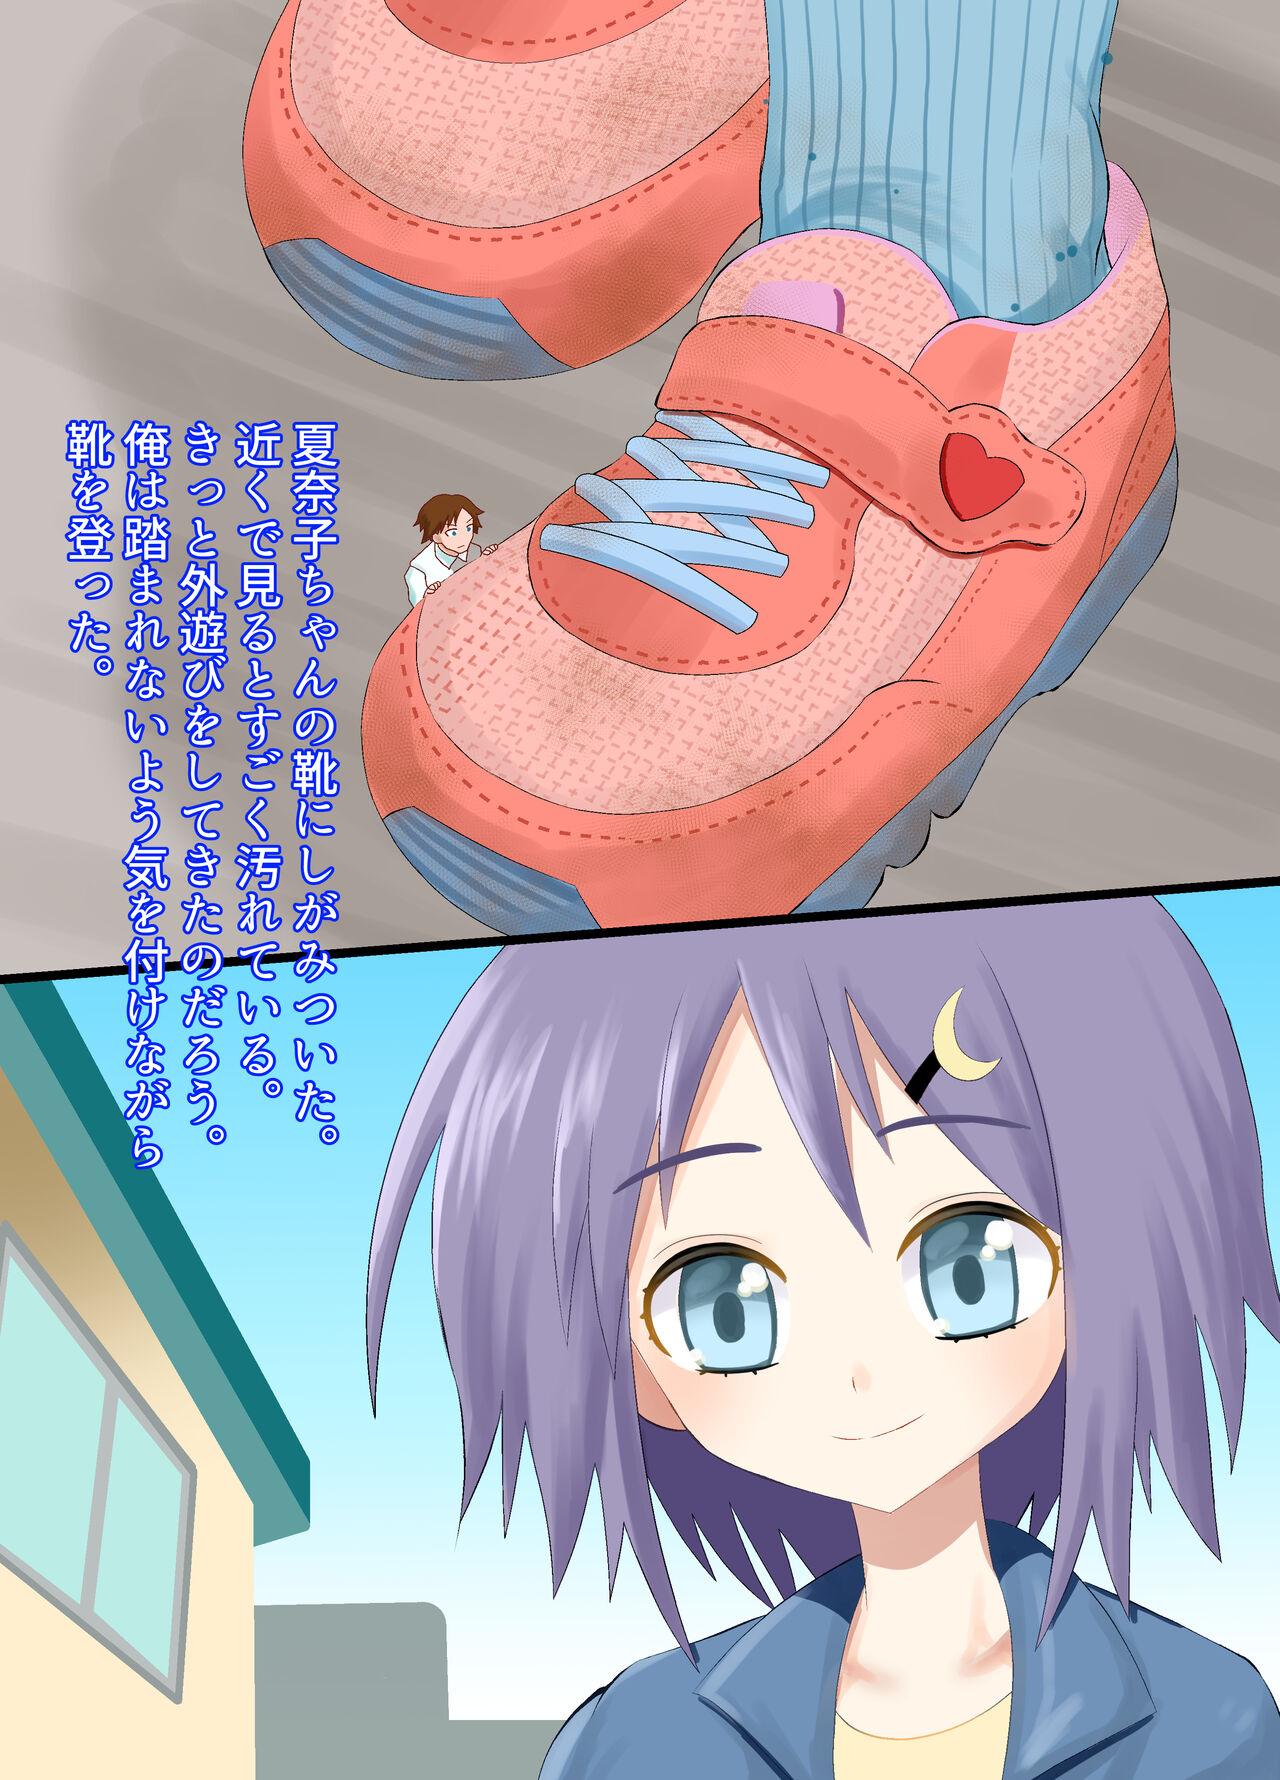 A CG collection of getting smaller and being stepped on by a girl 4